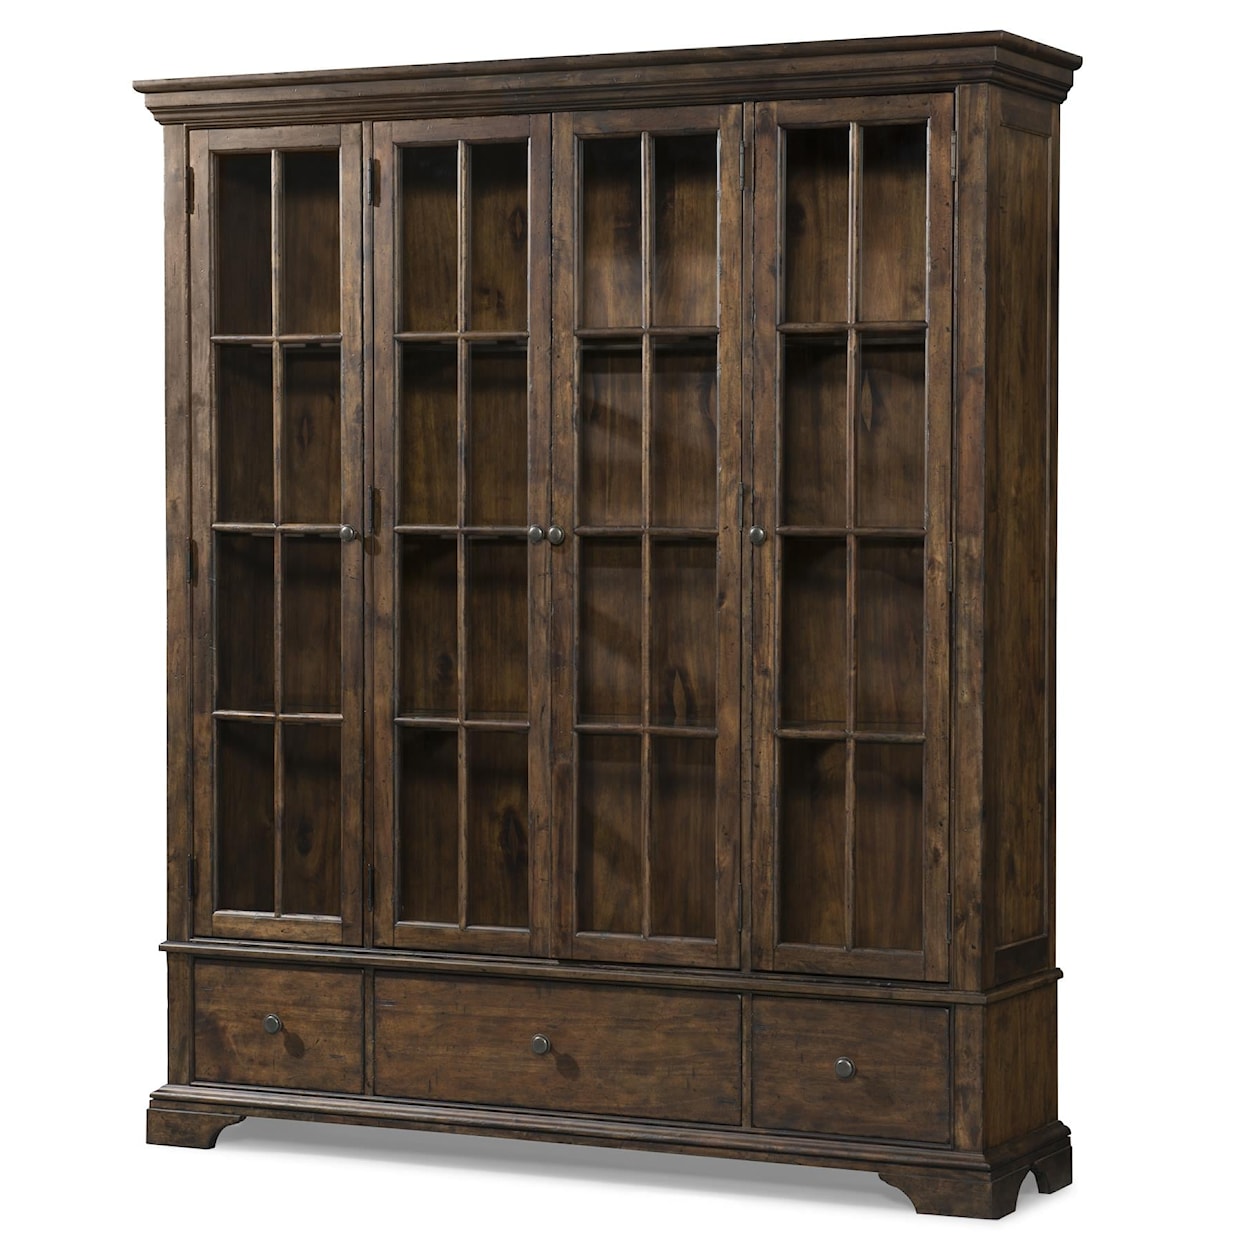 Trisha Yearwood Home Collection by Legacy Classic Trisha Yearwood Home Monticello Display Cabinet